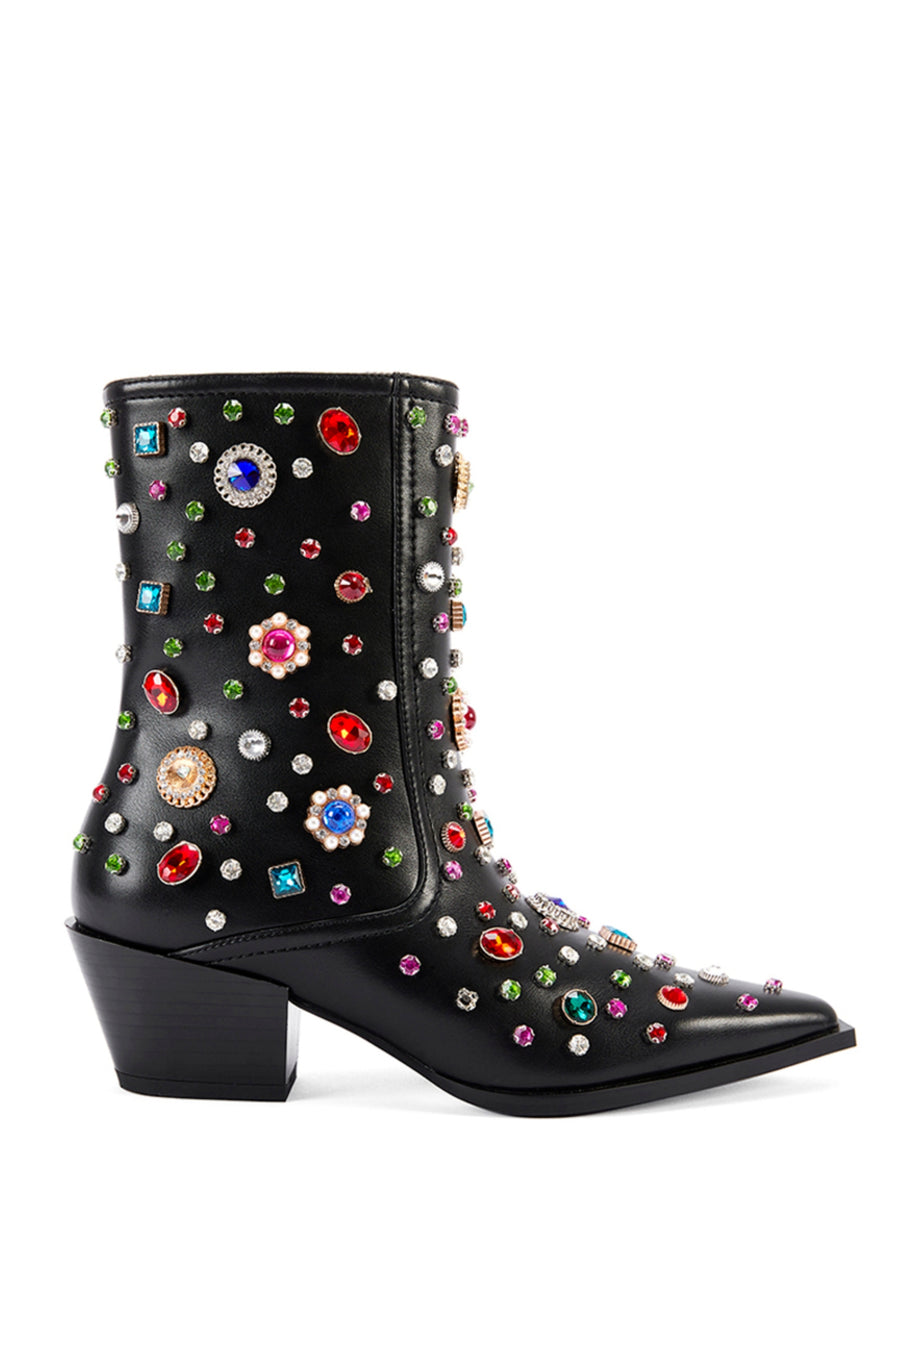 black faux leather western bootie with classic cowboy bootie silhouette and multicolored rhinestone gem embellished accents